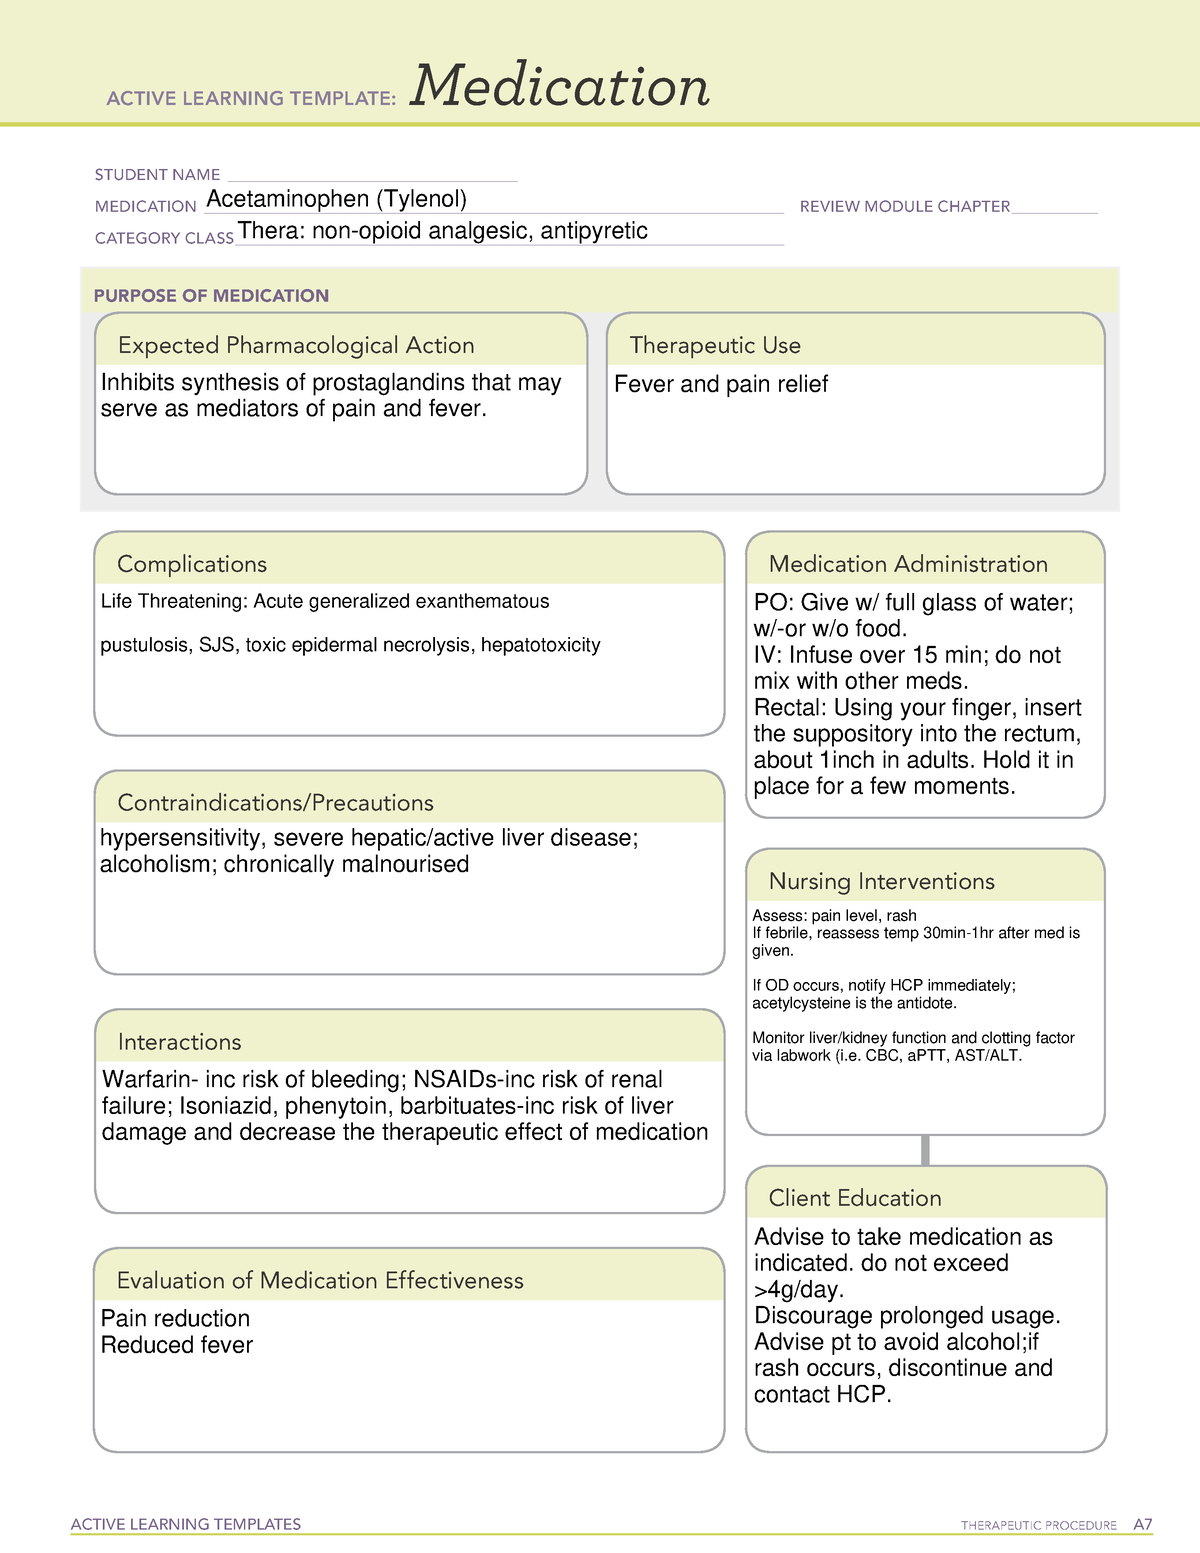 Acetaminophen - ATI MED TEMPLATE - ACTIVE LEARNING TEMPLATES ...